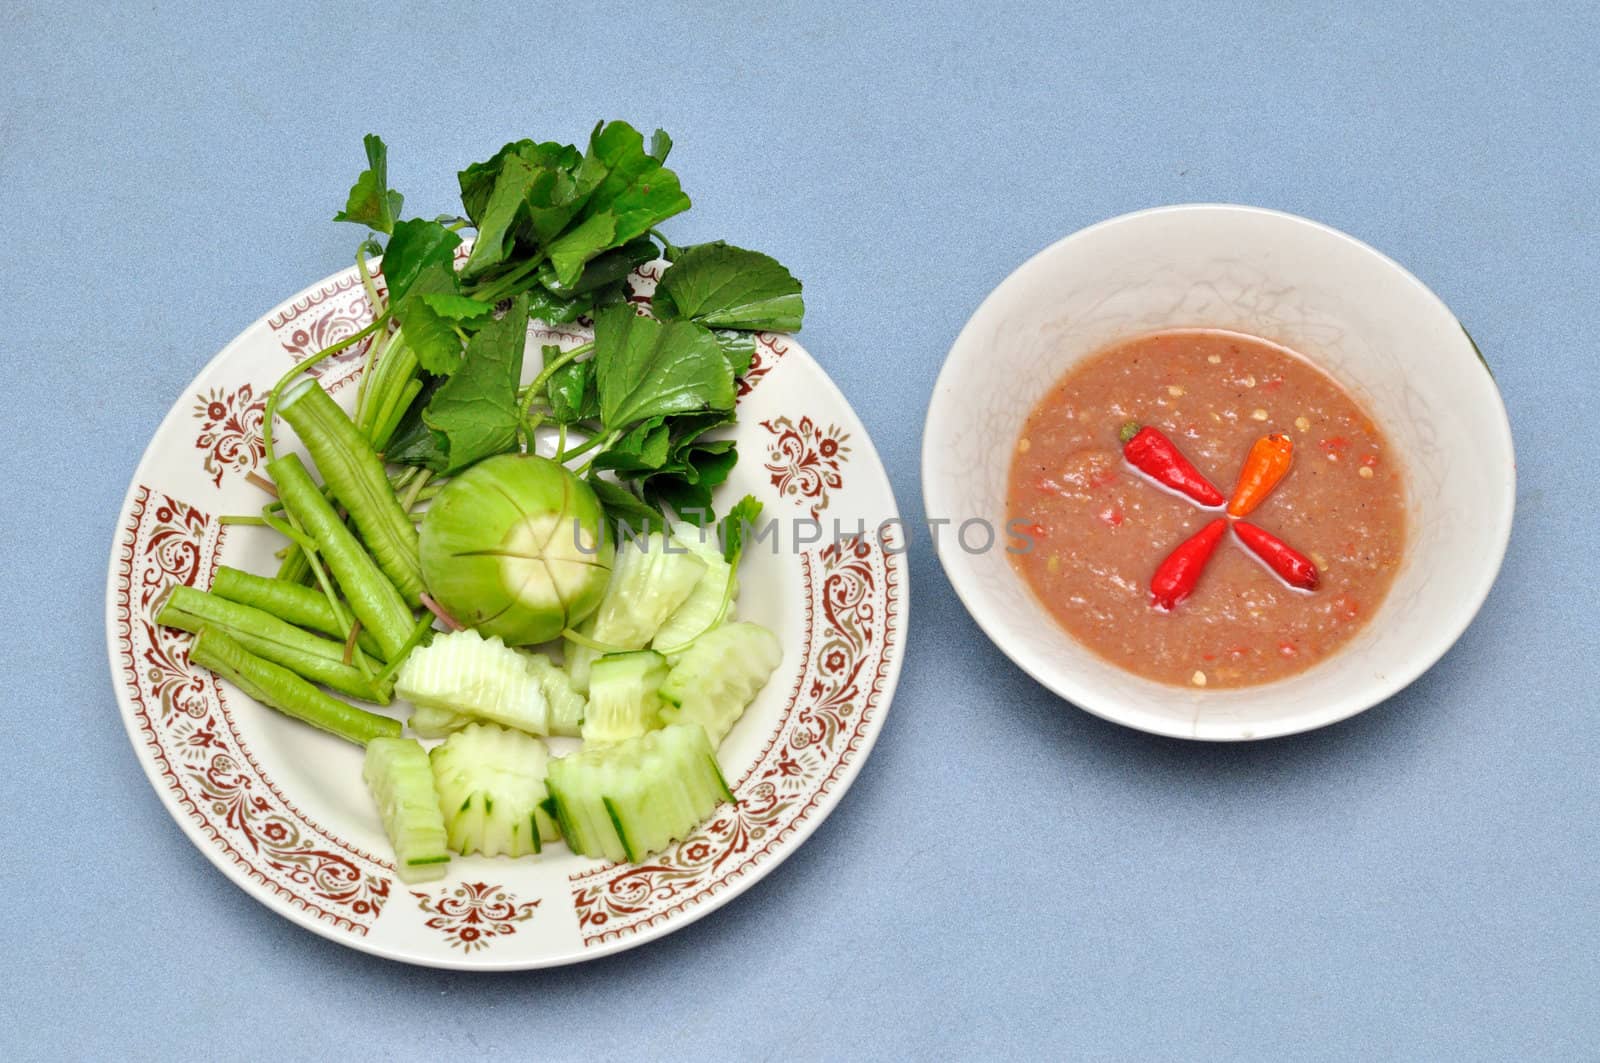 Thai chili sauce and mixed vegetables by bigjom